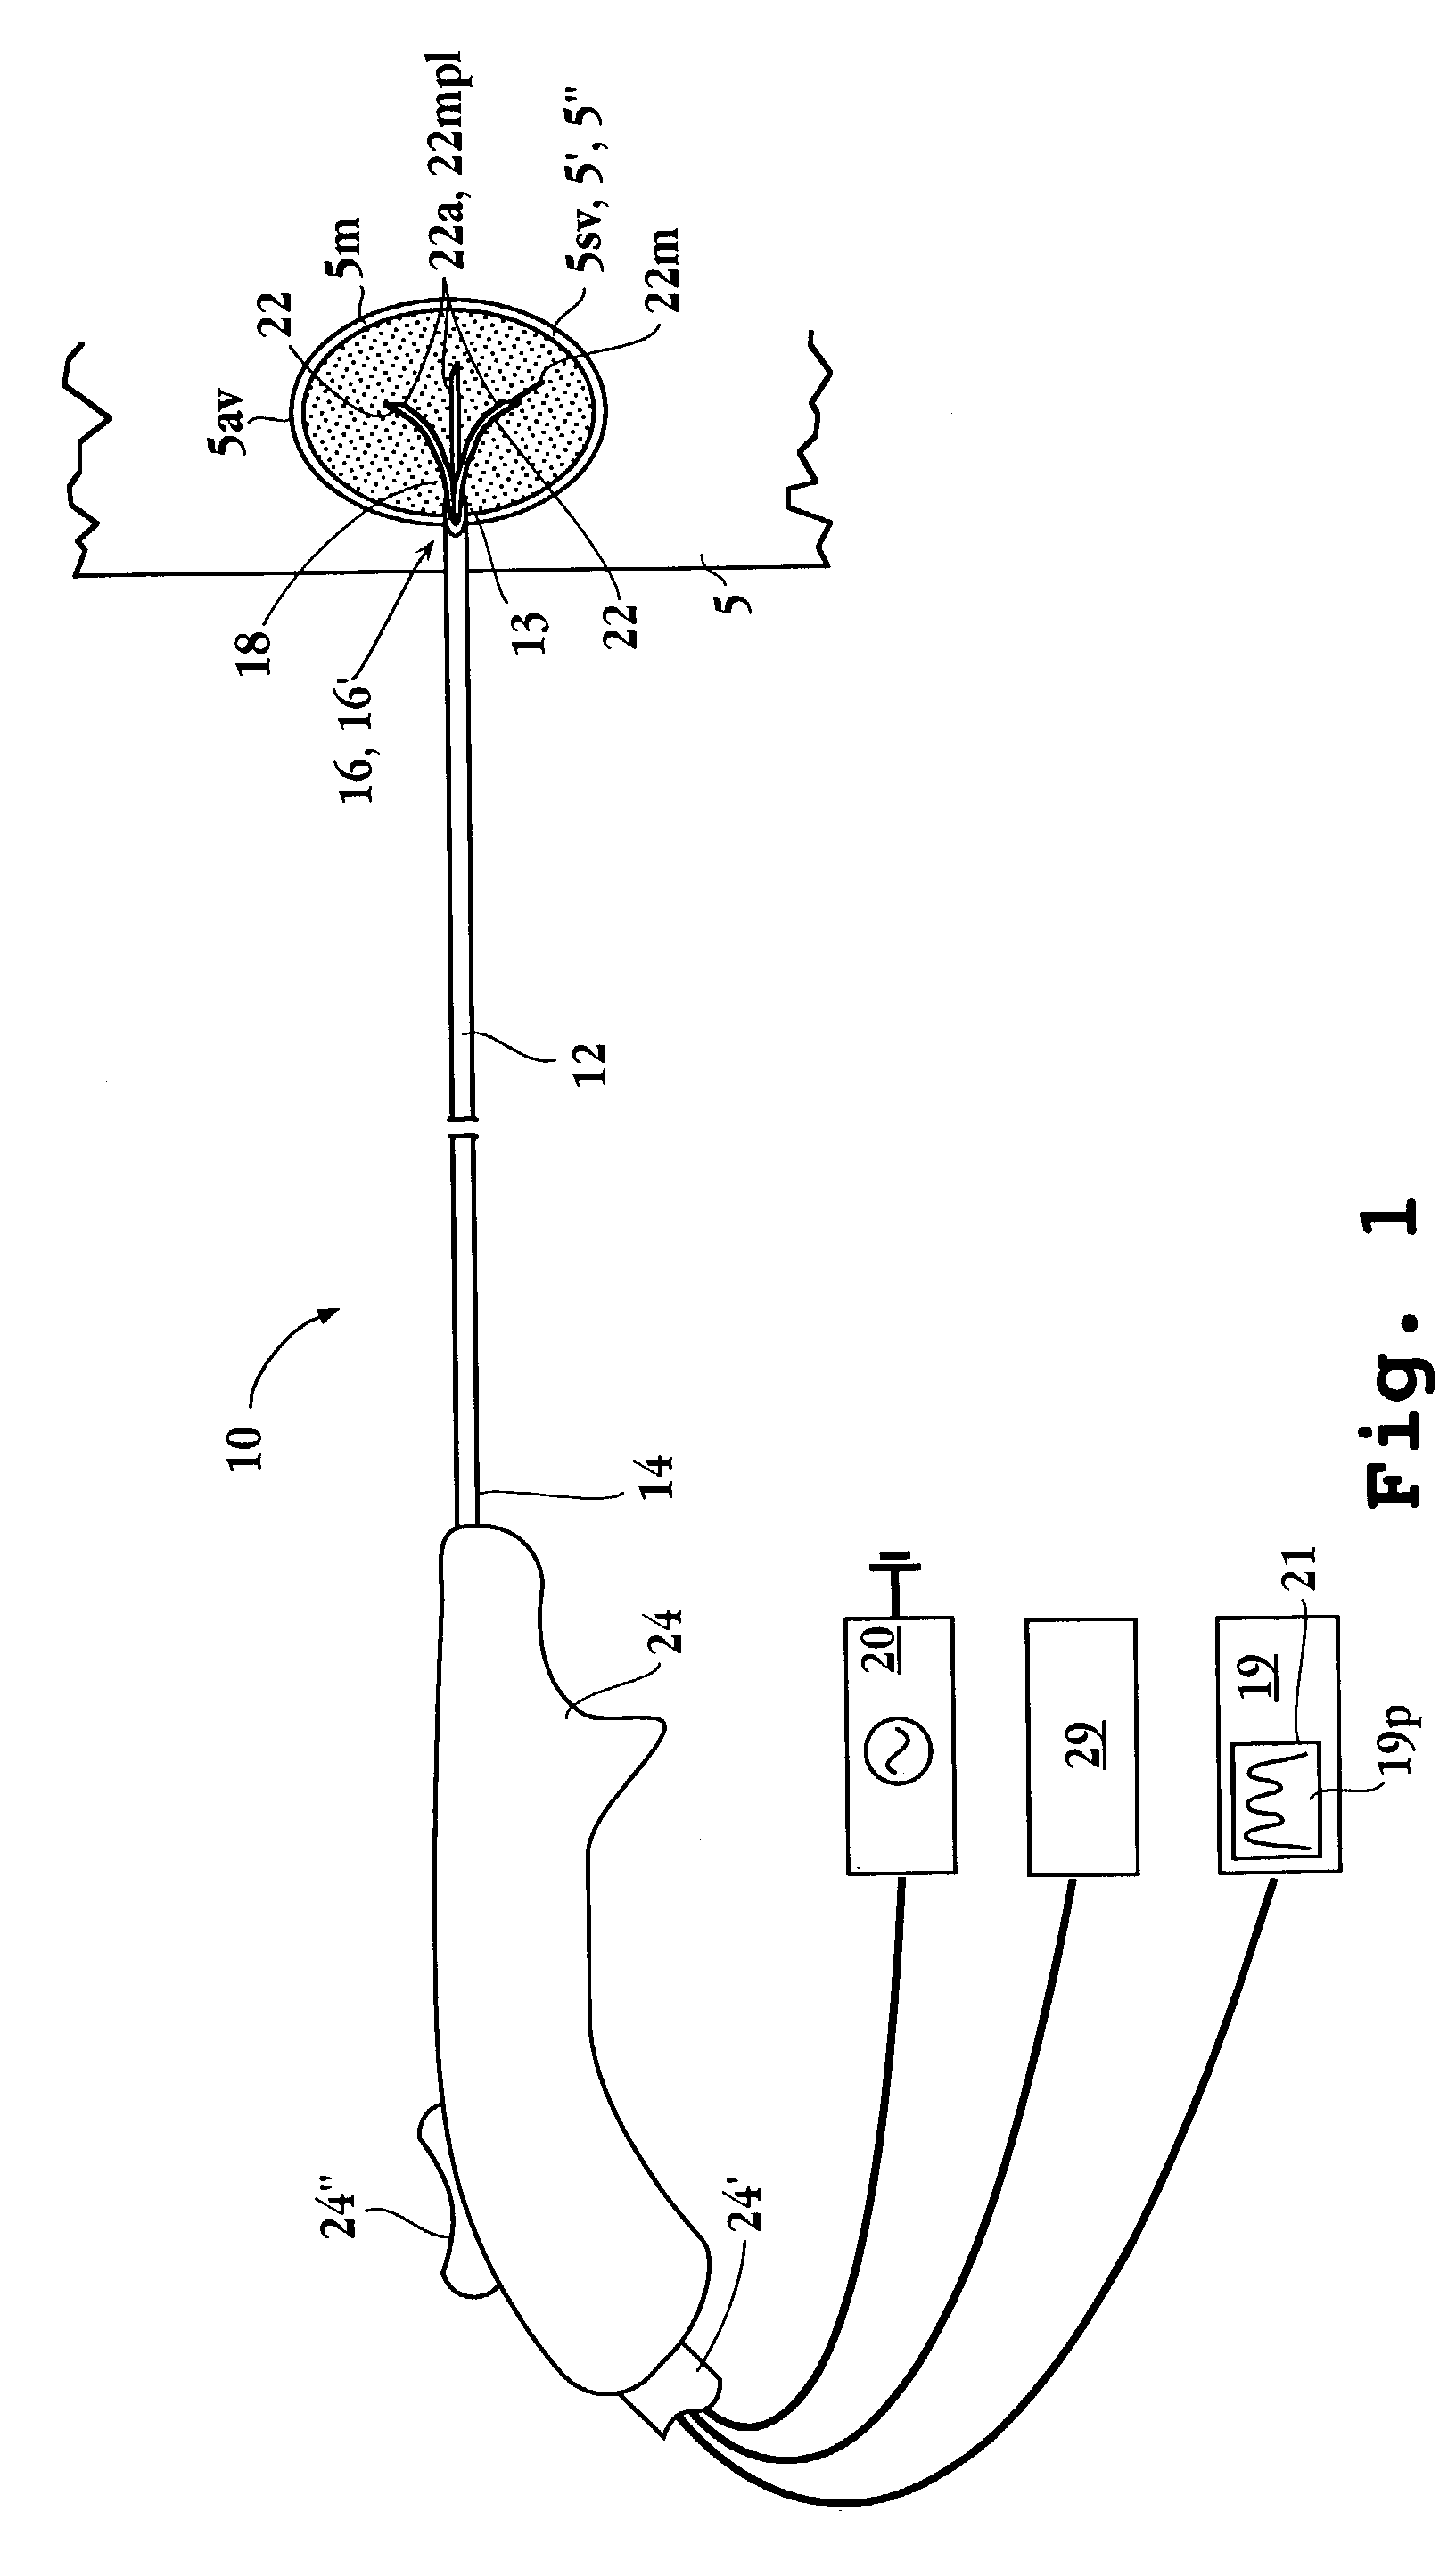 Apparatus for detecting and treating tumors using localized impedance measurement